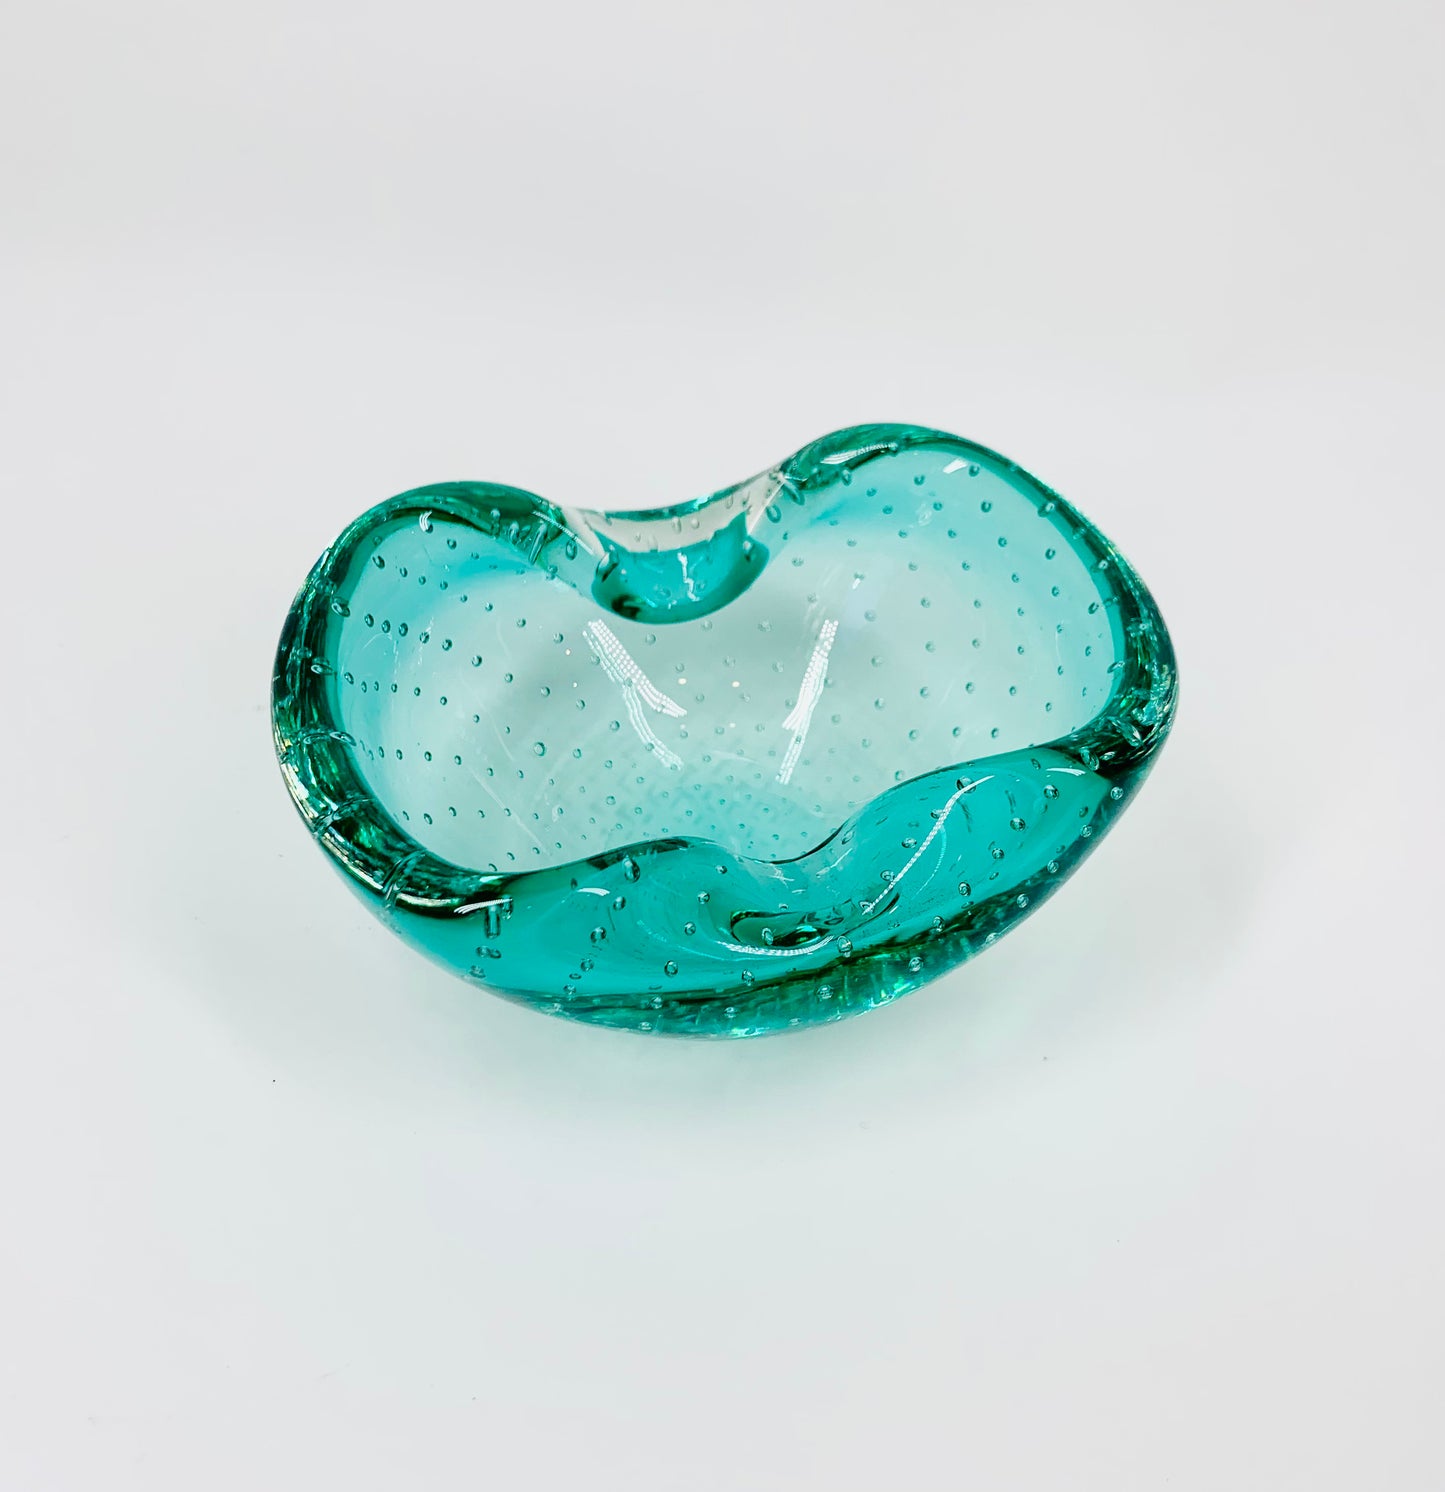 Stunning and rare MCM Murano turquoise glass ashtray with controlled bubbles